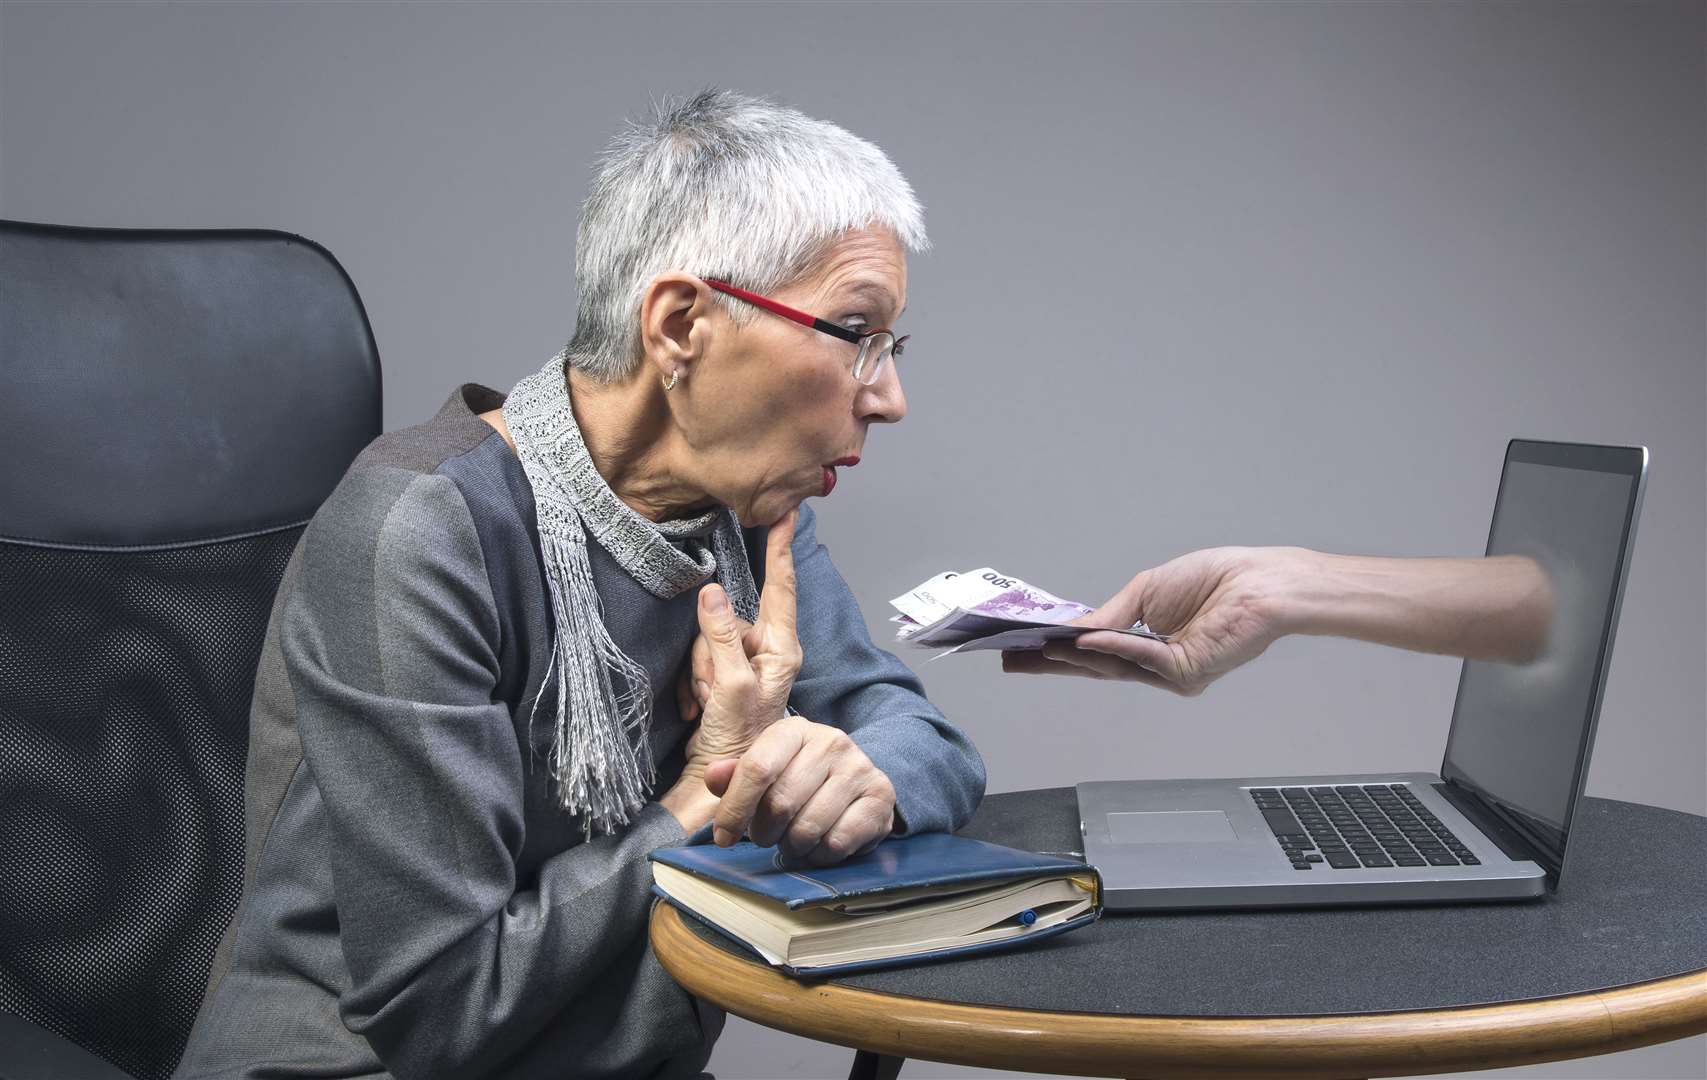 Gullible senior old lady being lured into an online scam that promises easy money, money fraud concept